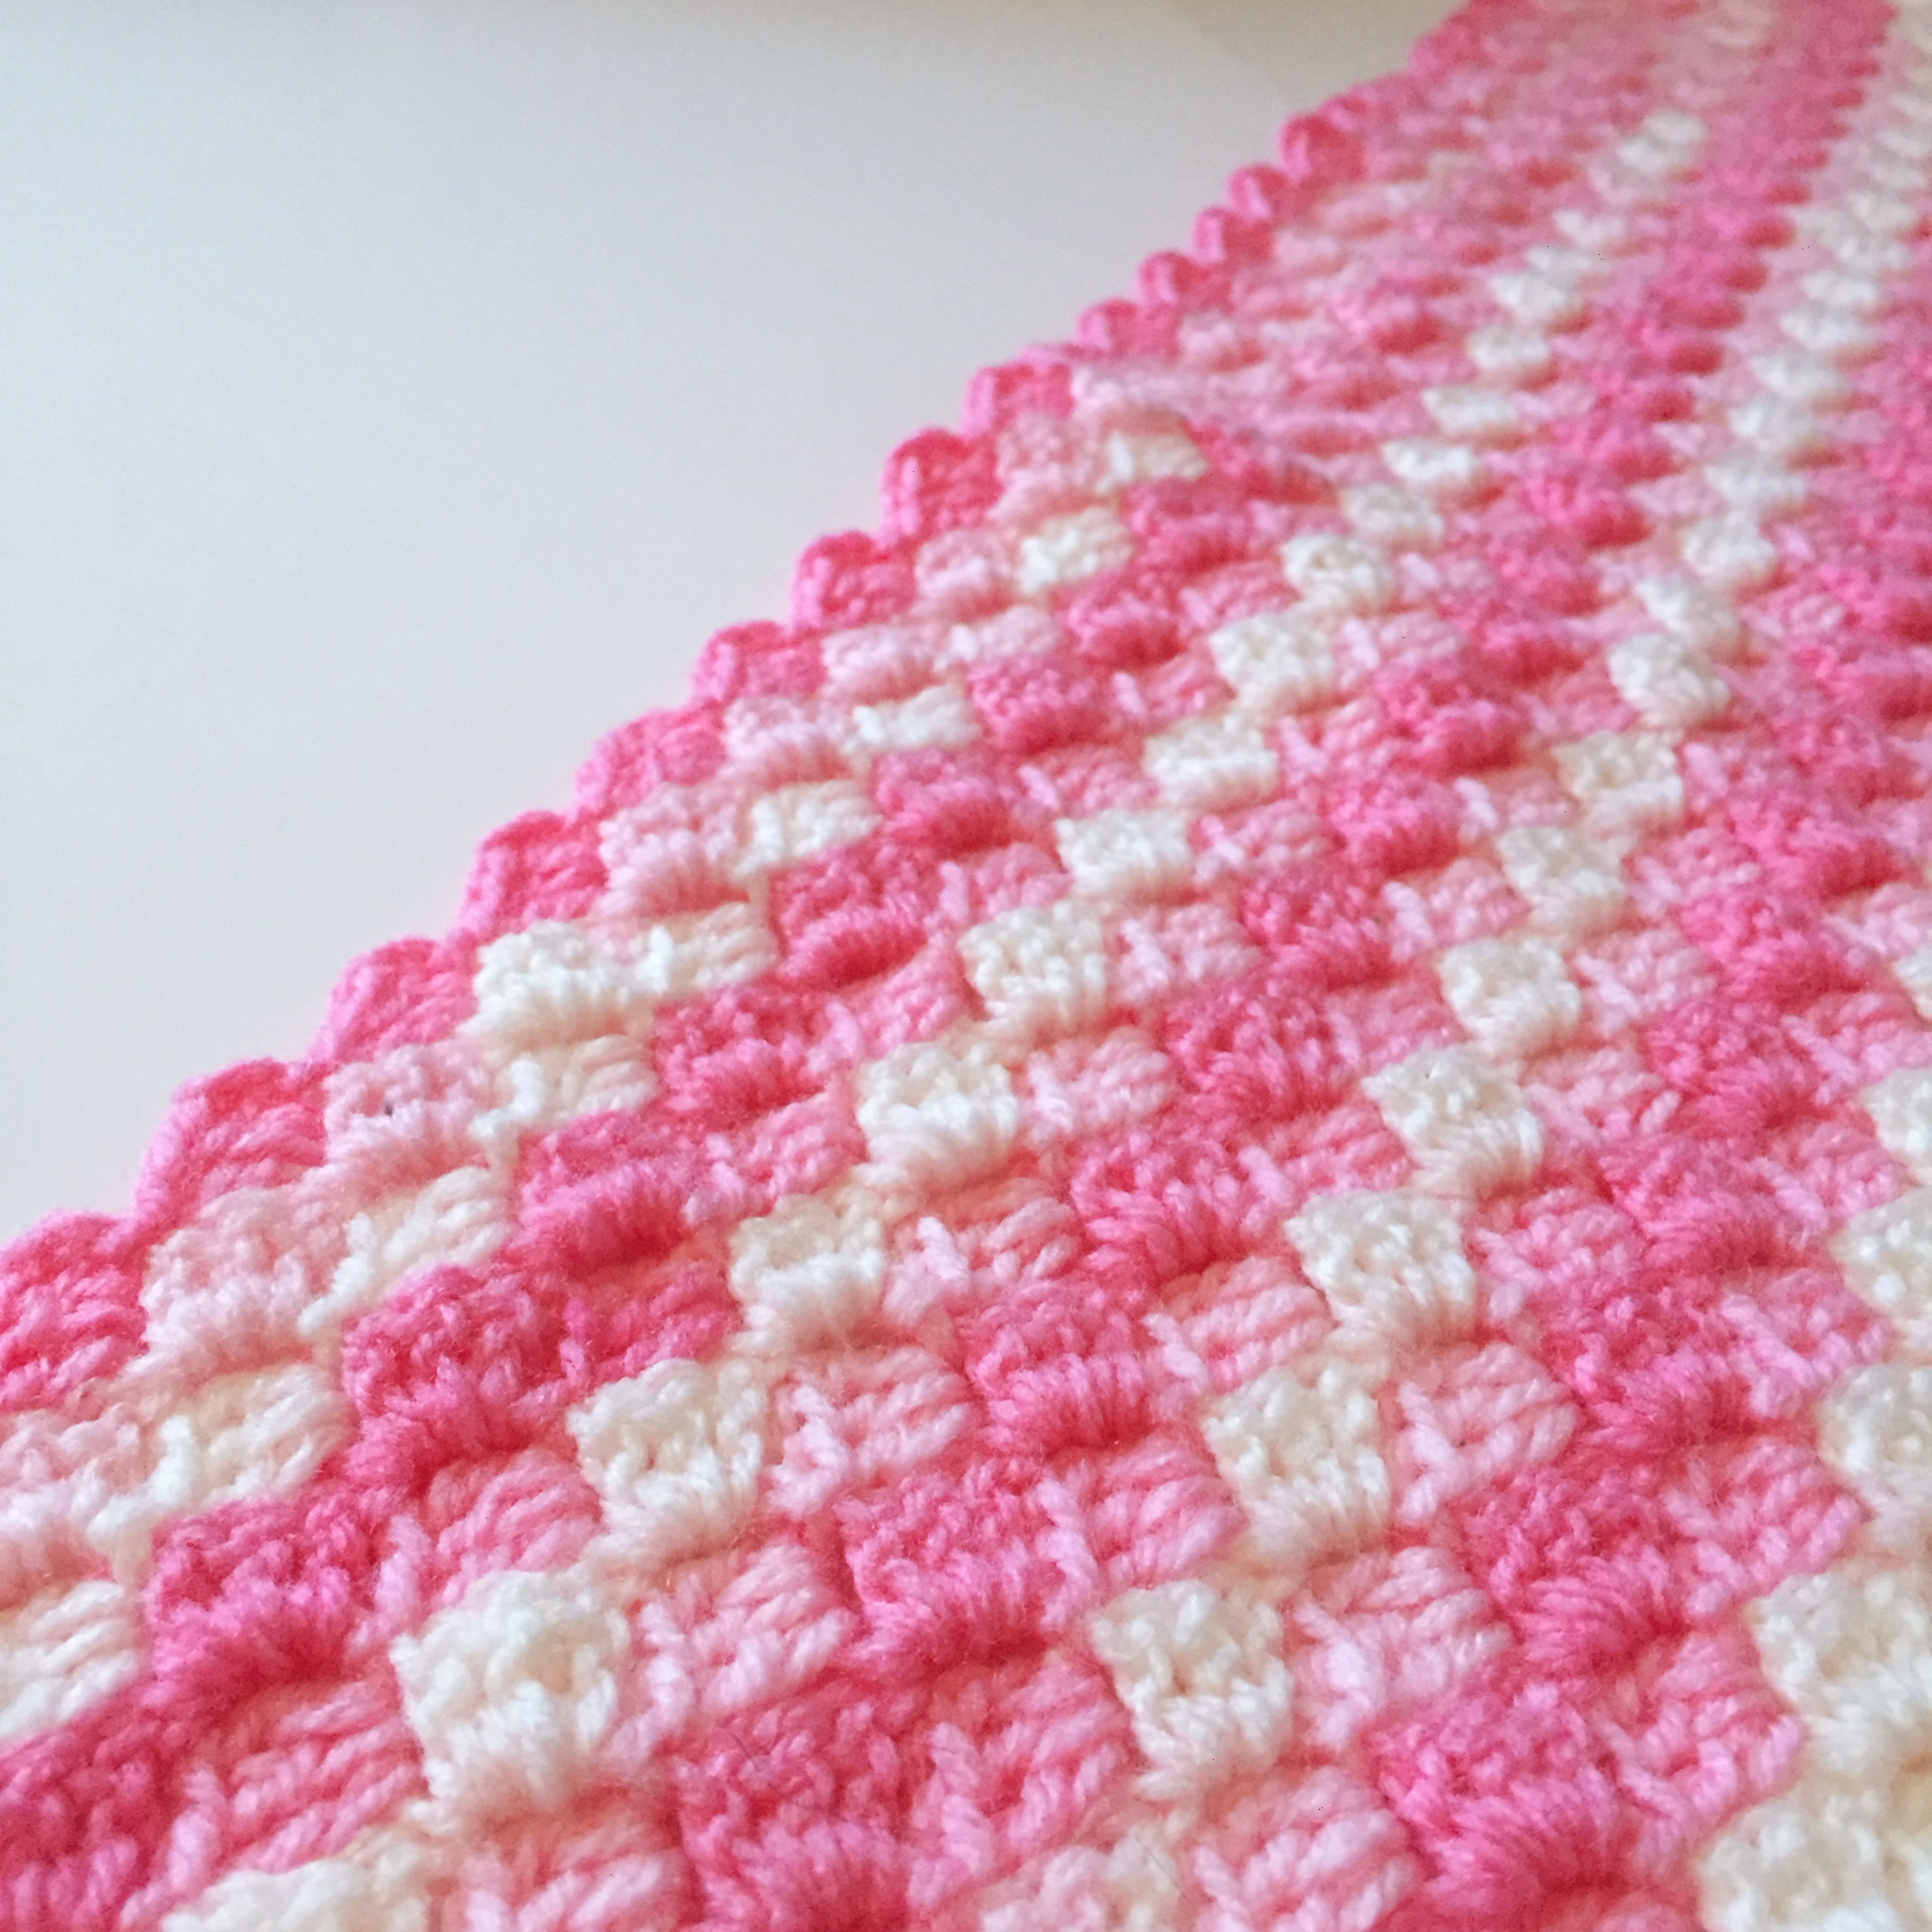 Baby blanketLion Brand Jiffy yarn (love it!). Pattern from 280 crochet  shells. Start with initial chain of 120 to make…